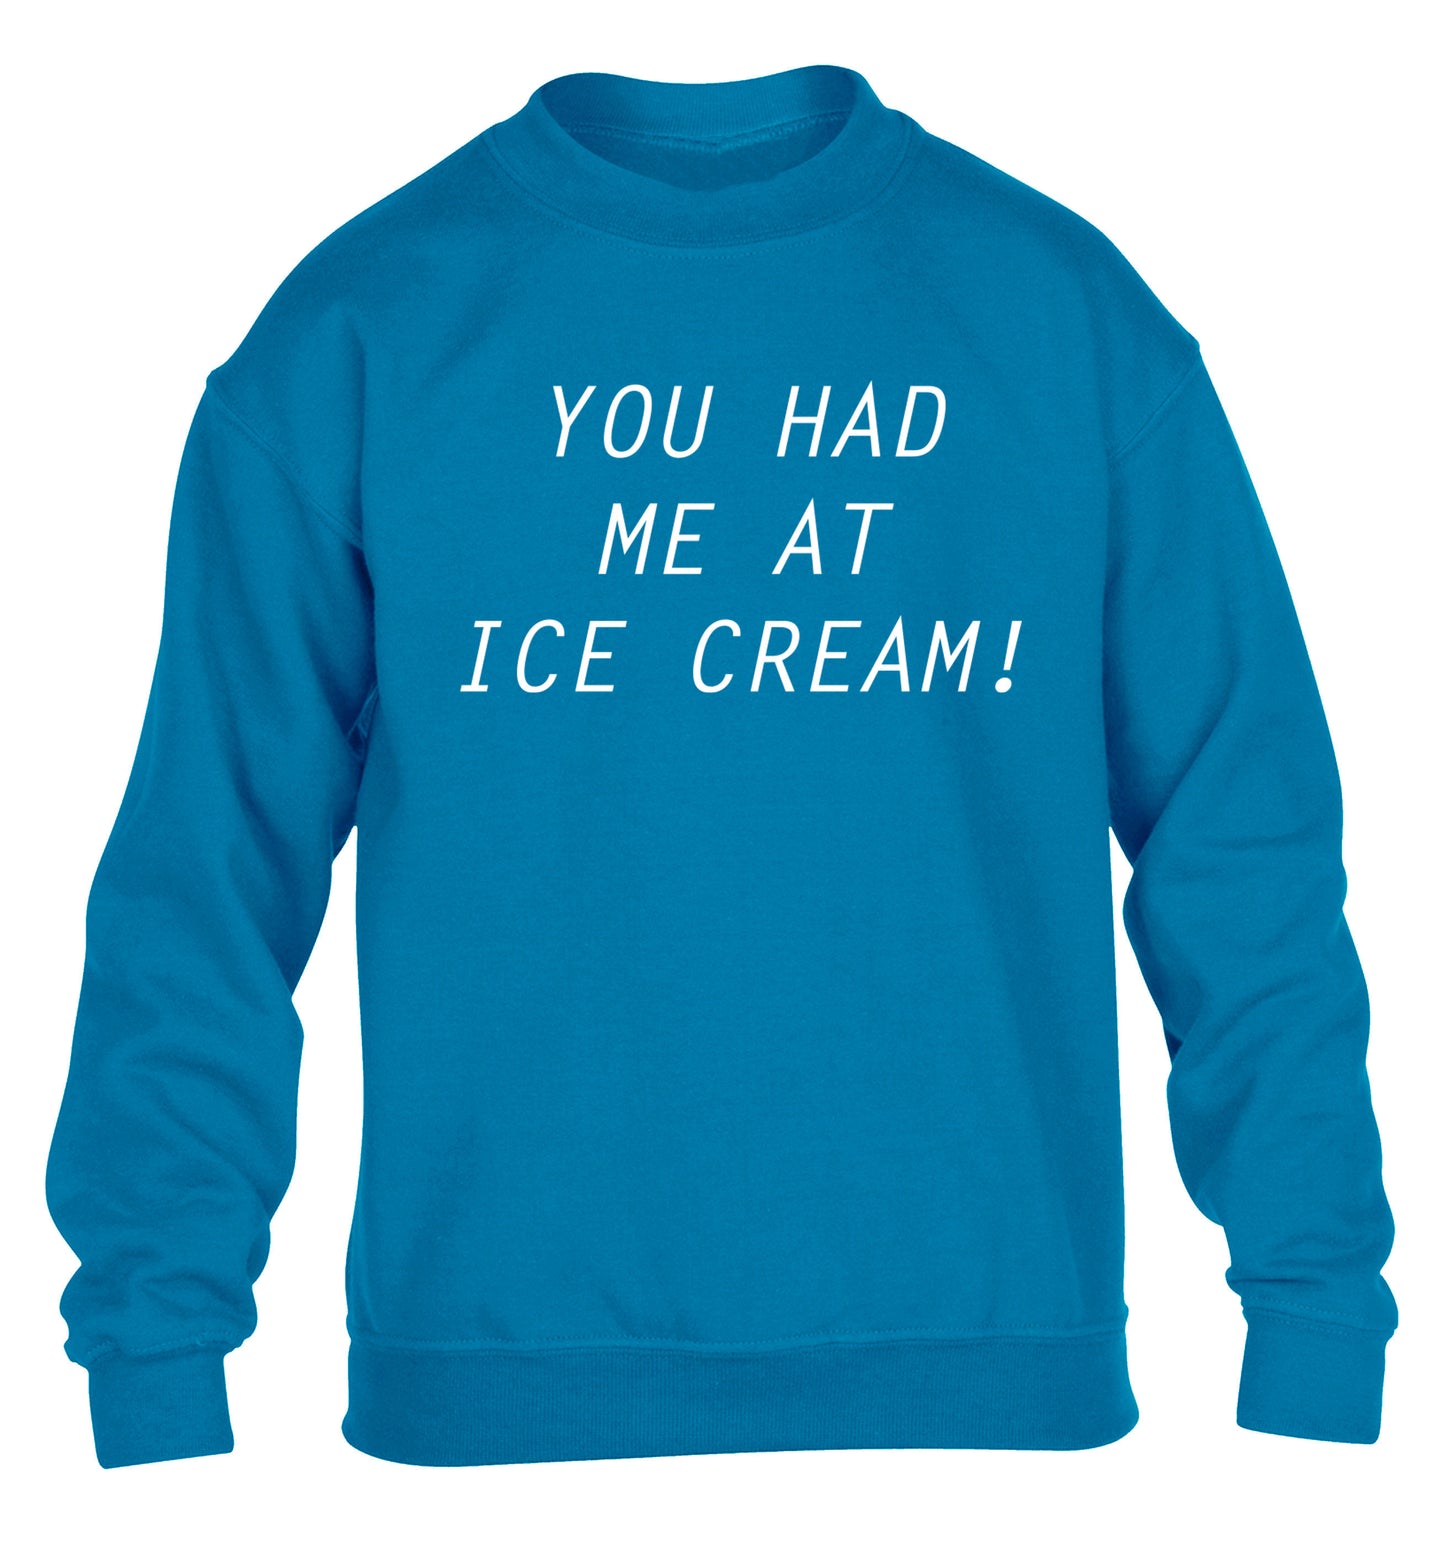 You had me at ice cream children's blue sweater 12-14 Years